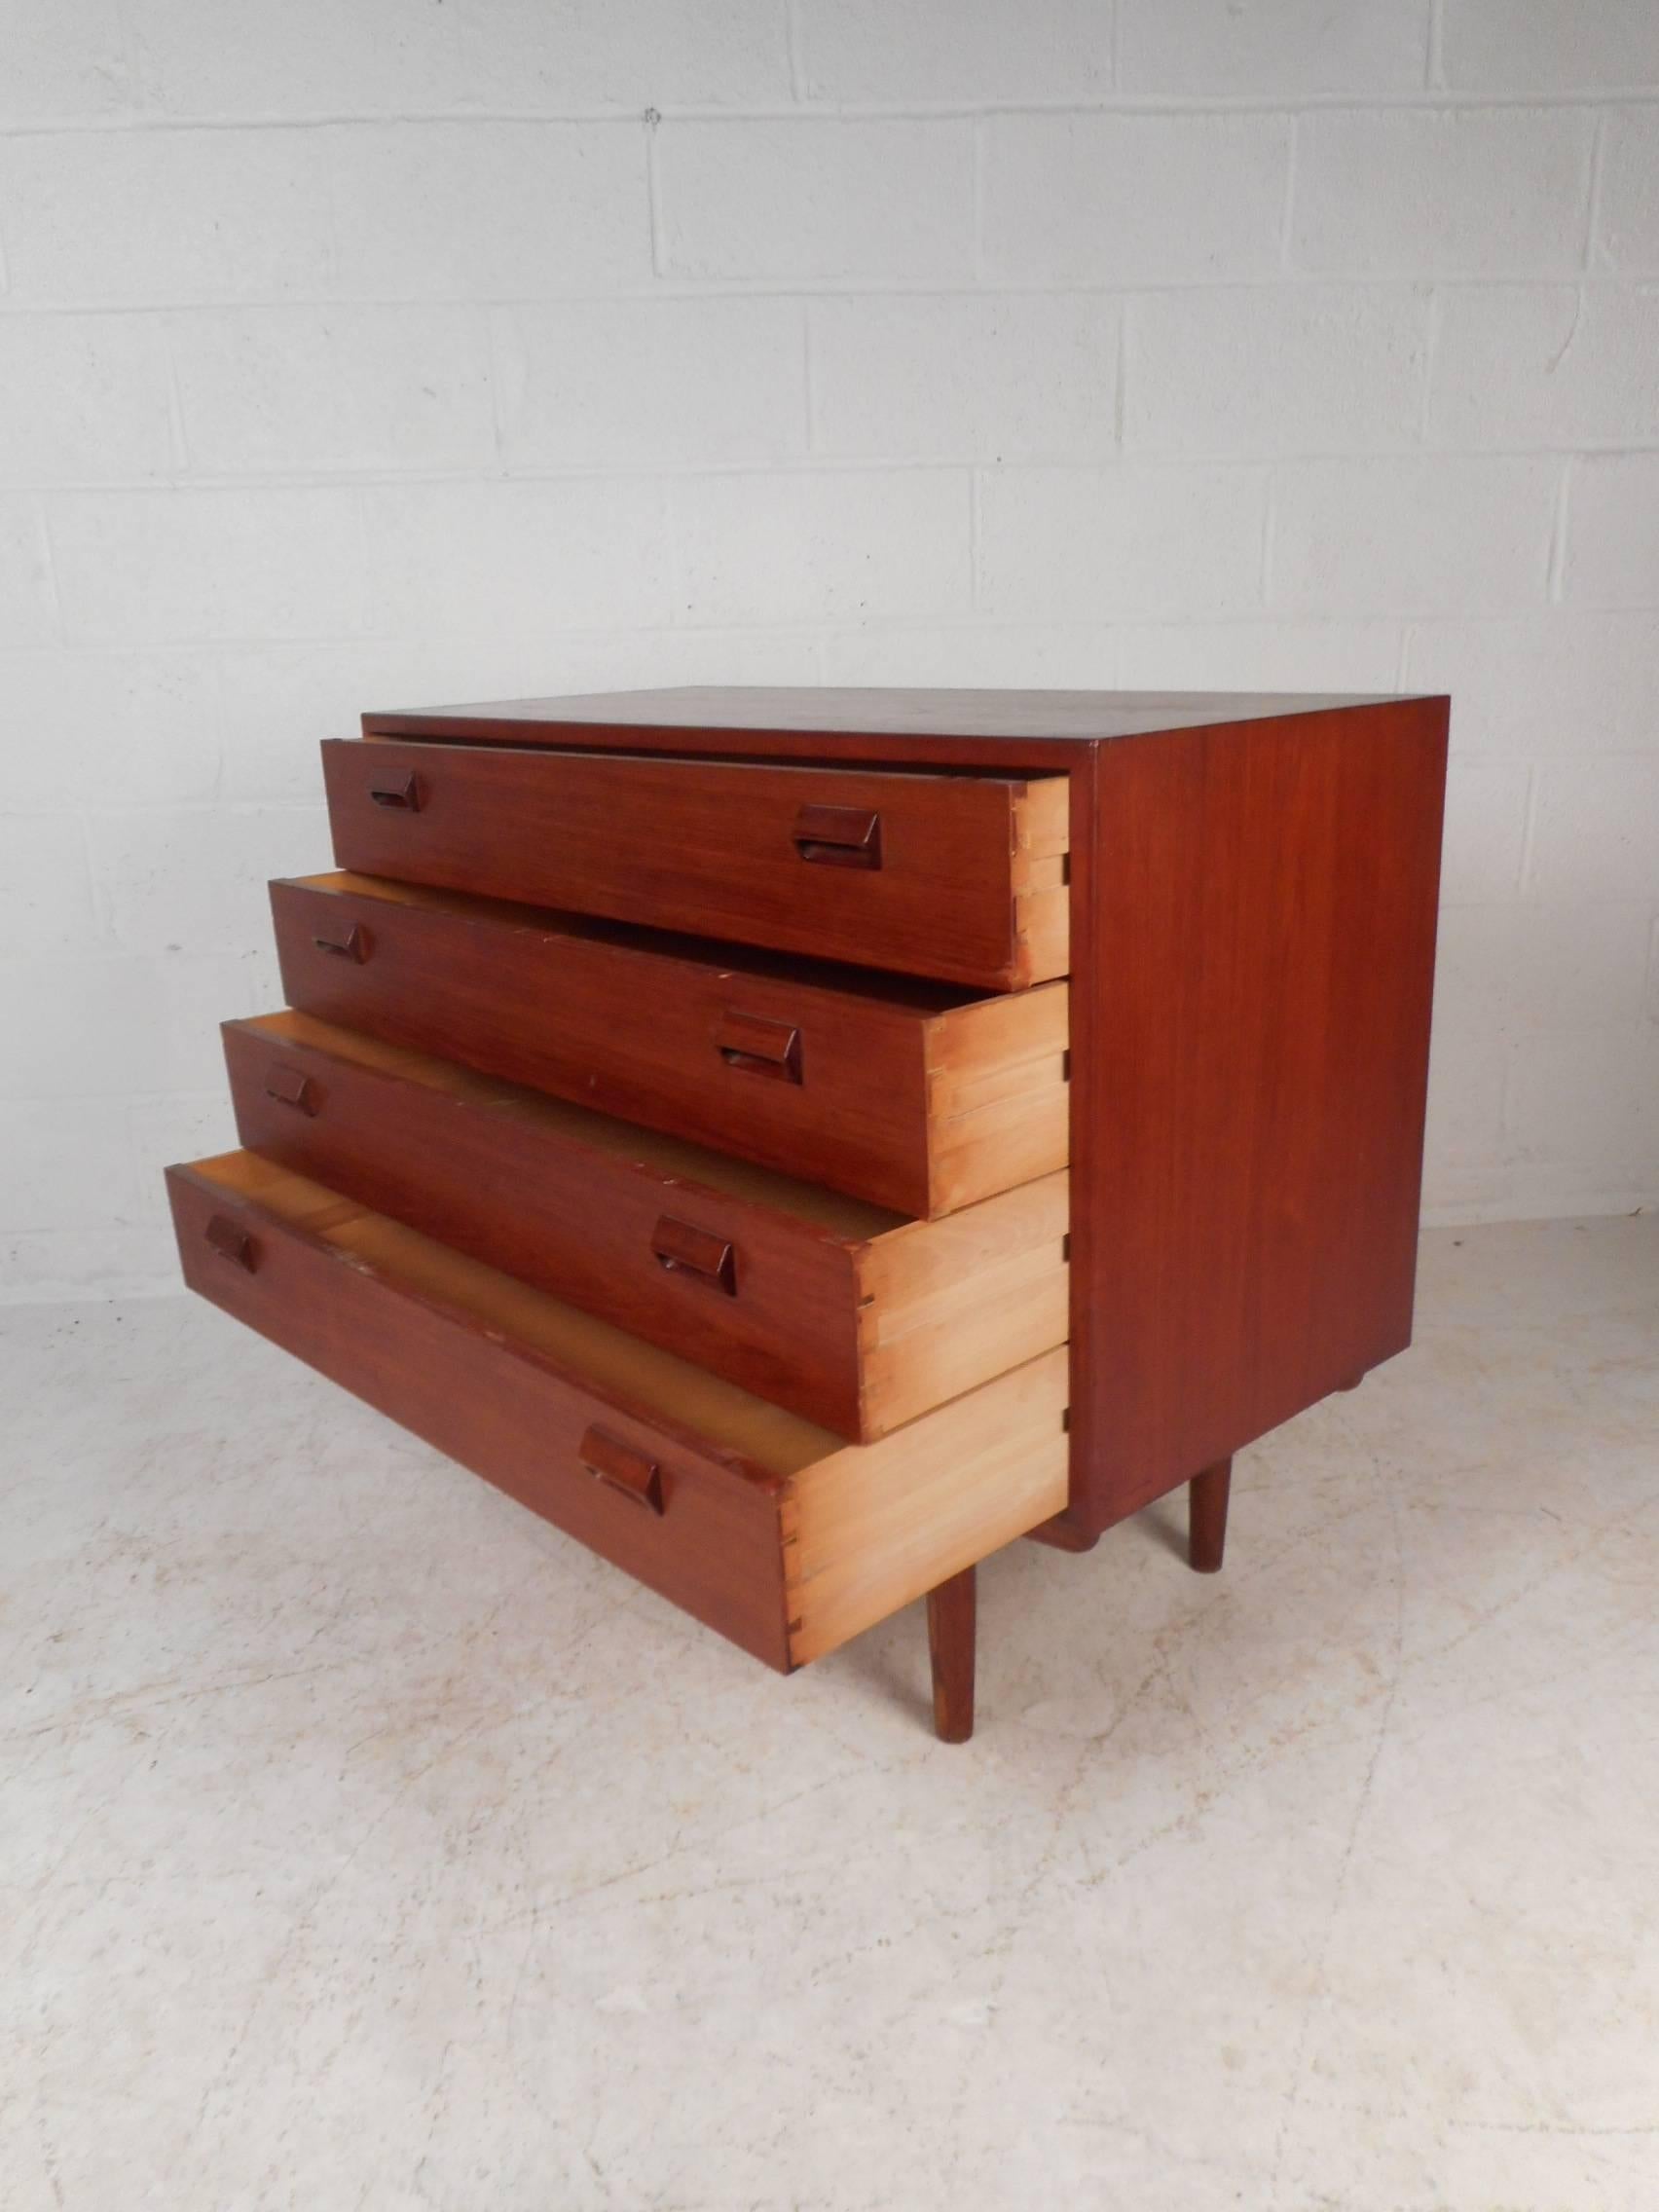 Stunning vintage modern gentleman's chest with plenty of room for storage. Sleek design with carved drawer pulls and sturdy tapered legs. Please confirm item location (NY or NJ).